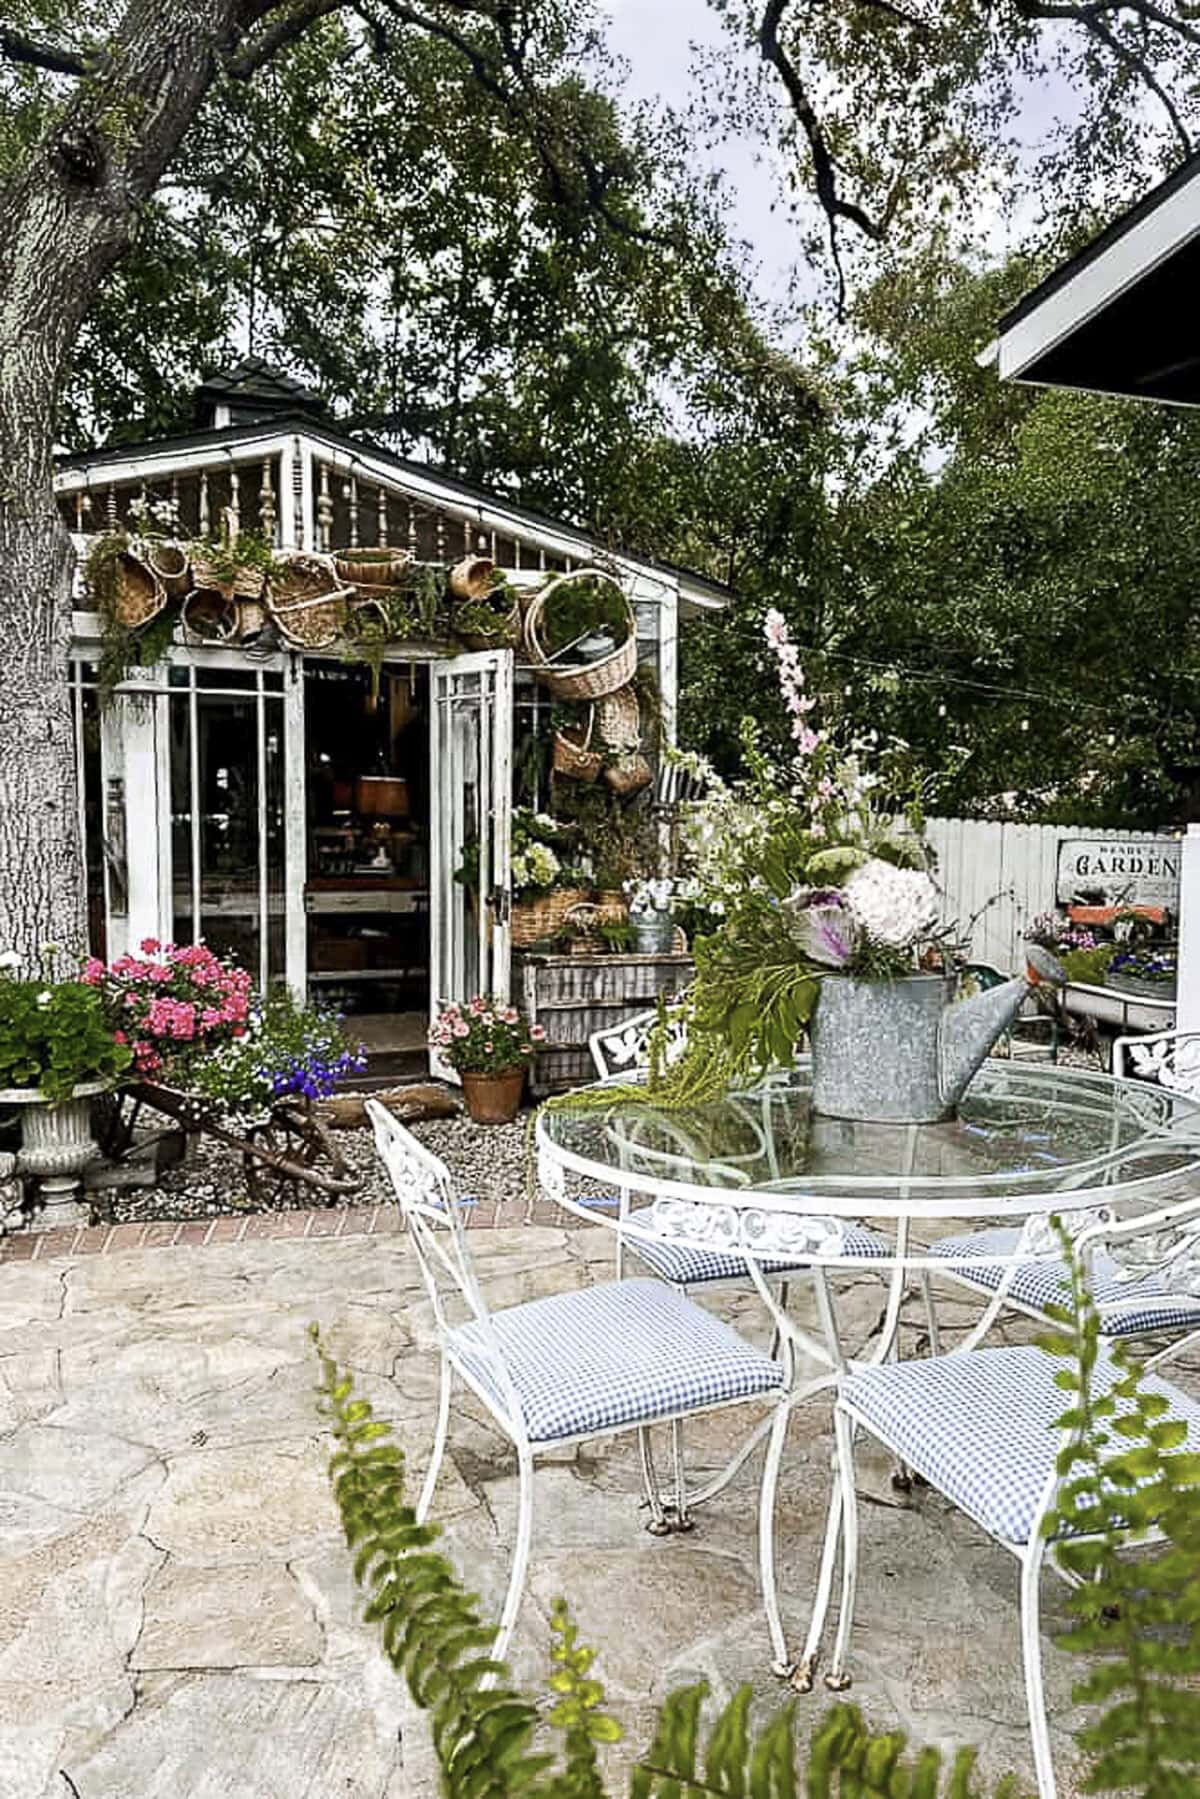 
A she shed decked out for the summer, featuring an arch of baskets, sits next to a patio with a vintage table and chairs, perfectly set for a summer luncheon.